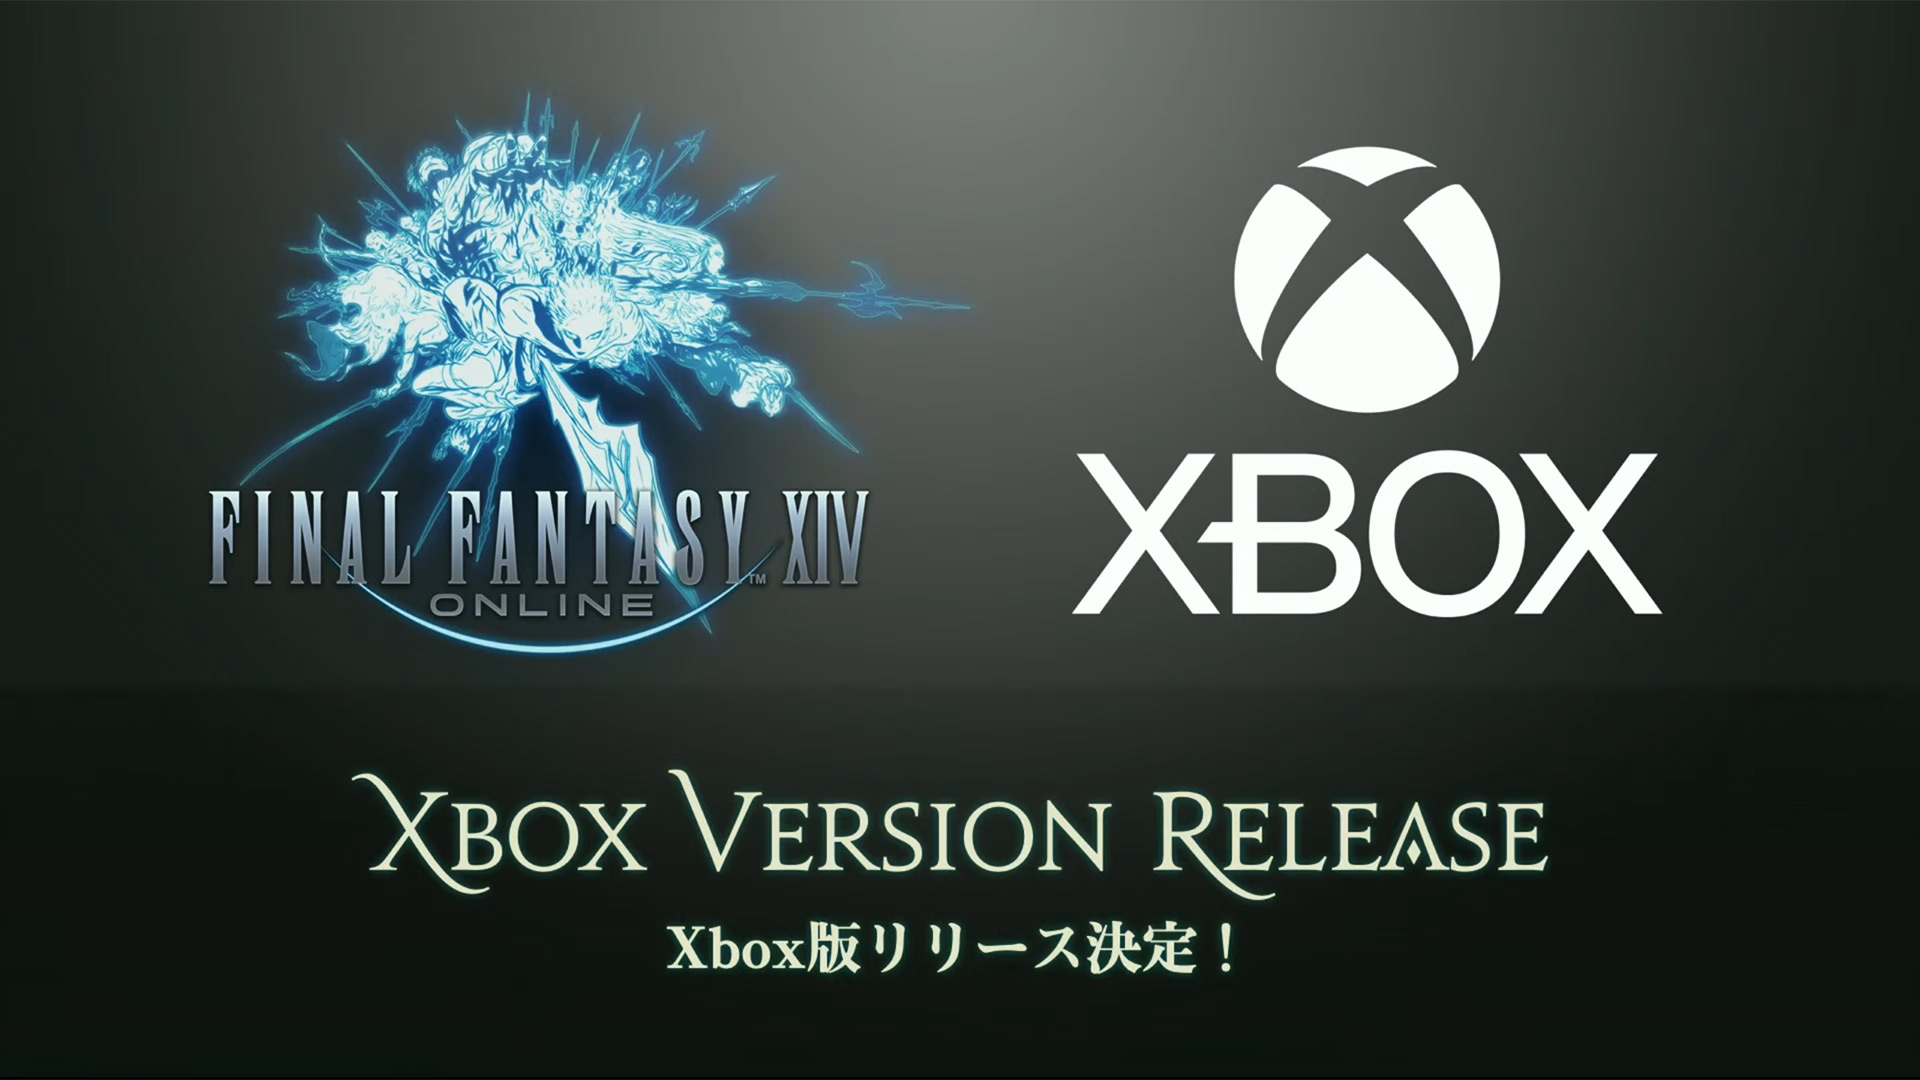 Final Fantasy XIV Online is finally heading to the Xbox console